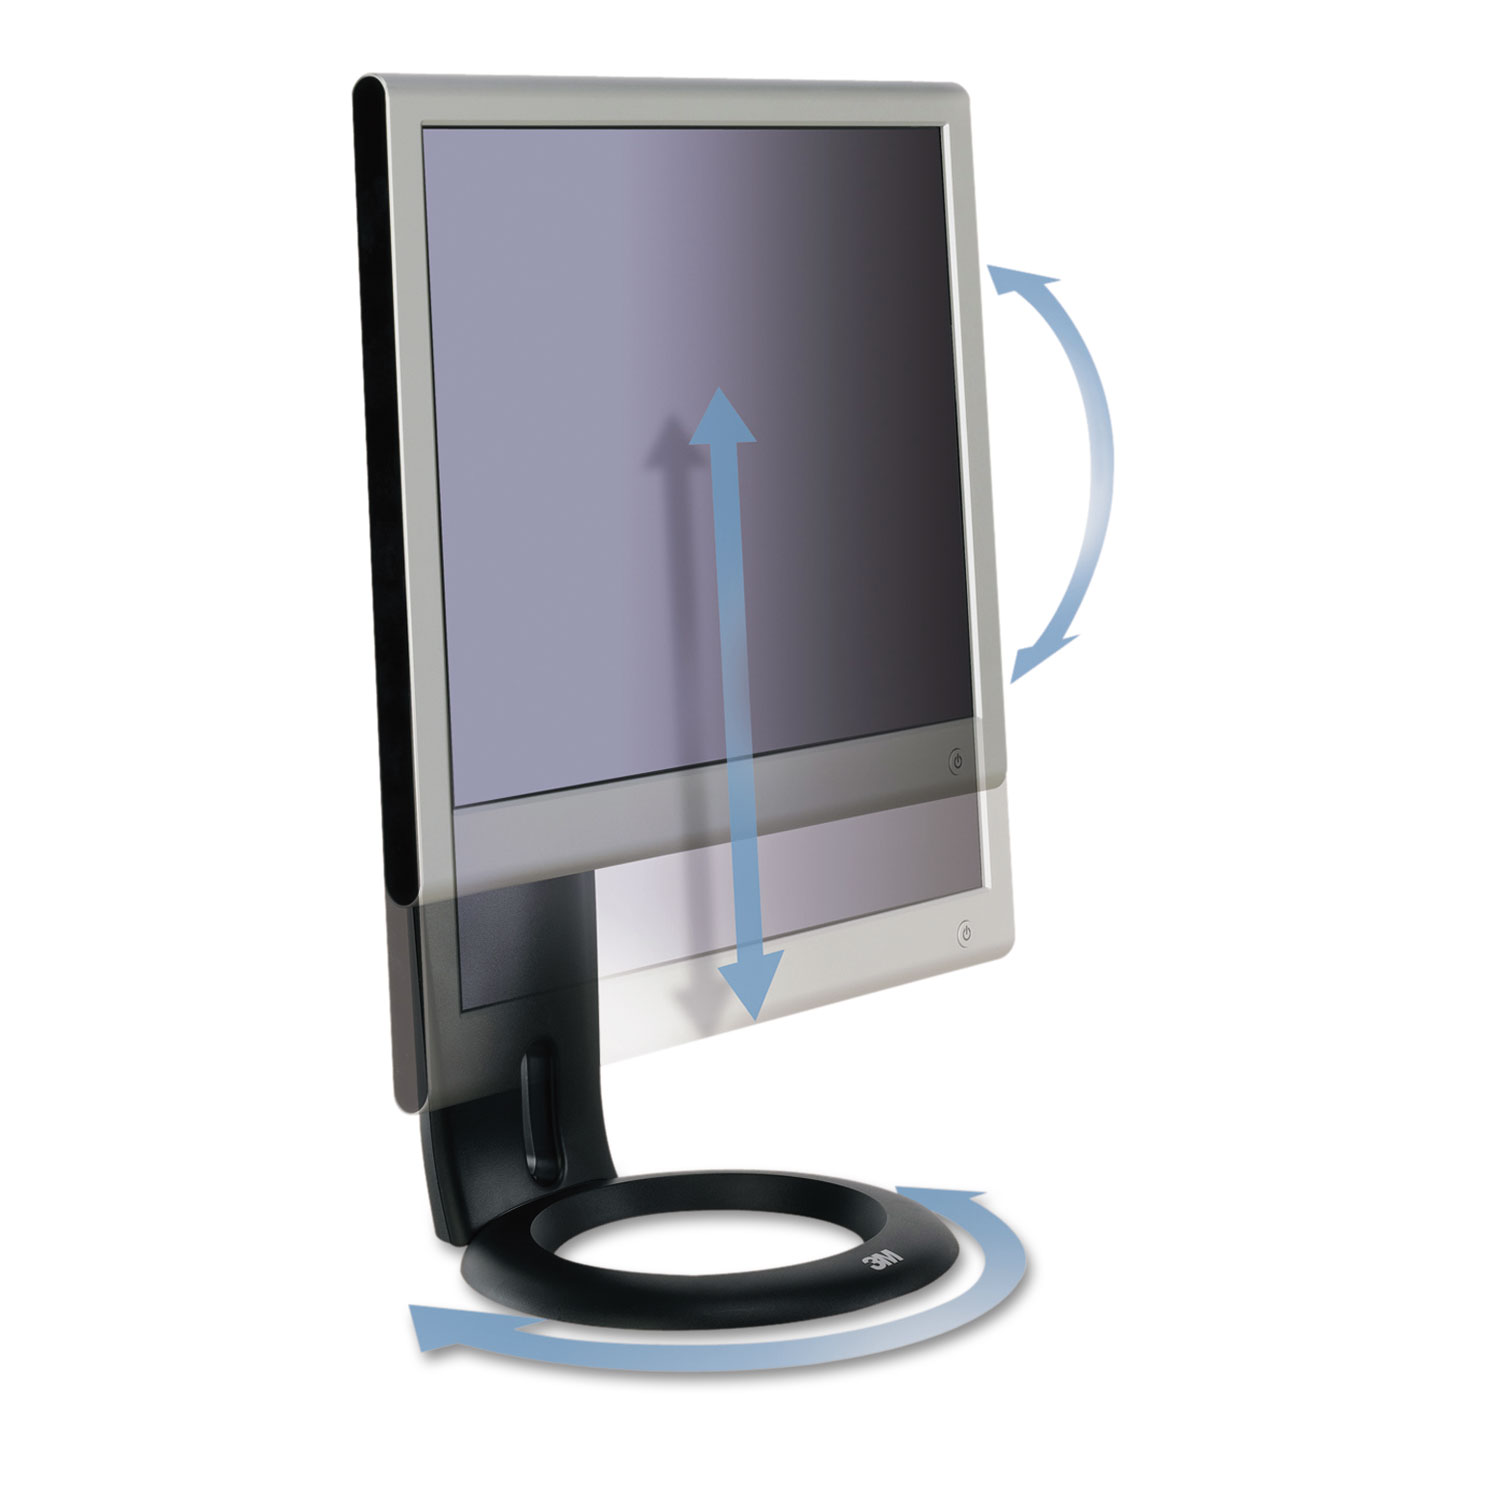 Easy-Adjust LCD Monitor Stand, 8 1/2 x 5 1/2 x 8 1/2 to 13 1/2, Black